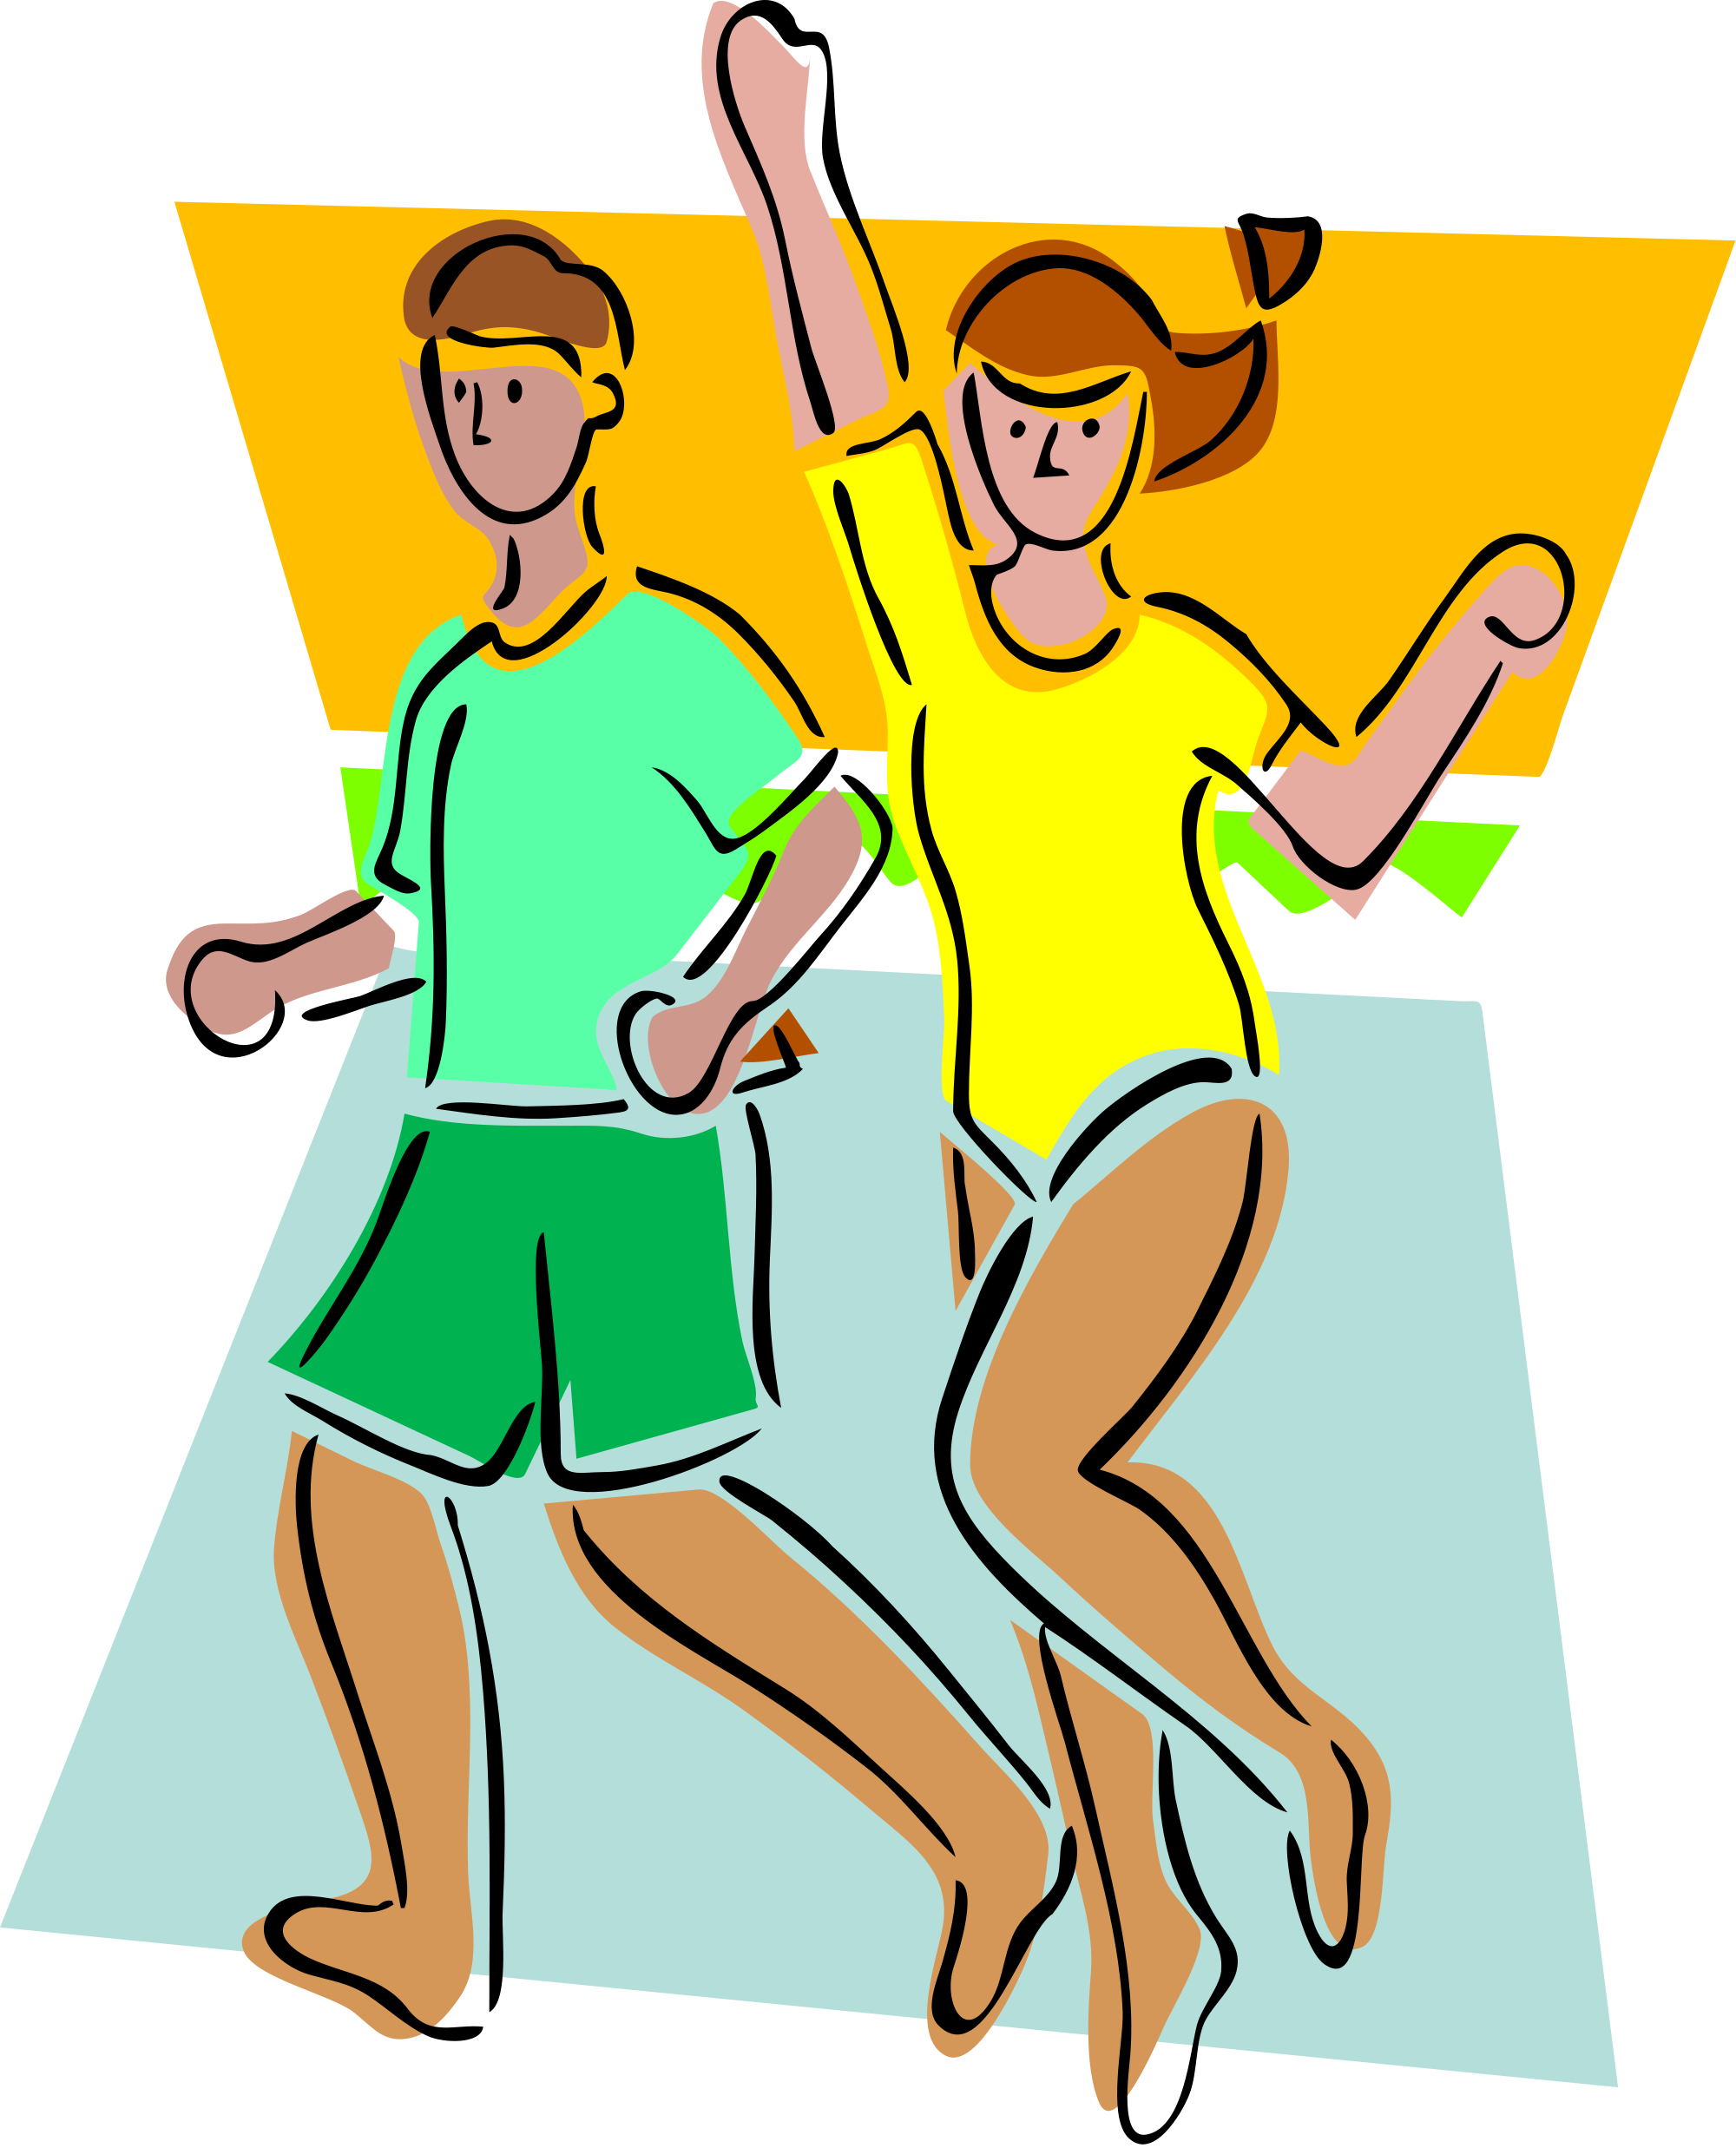 Gym class fileio donna. Movement clipart healthy student